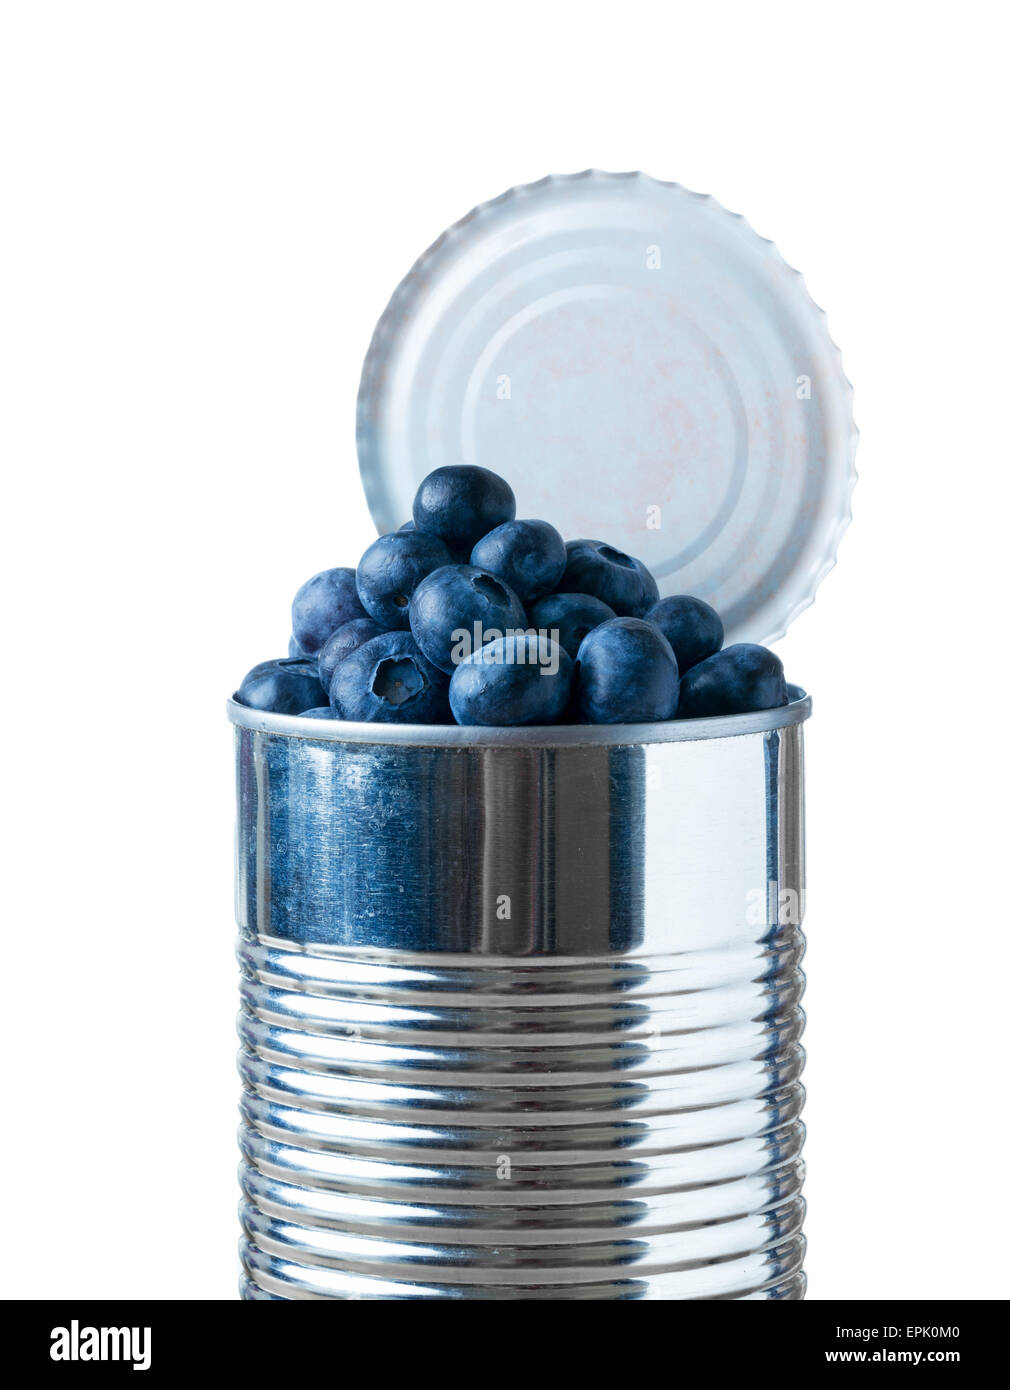 Blueberries bursting out of tin can Stock Photo